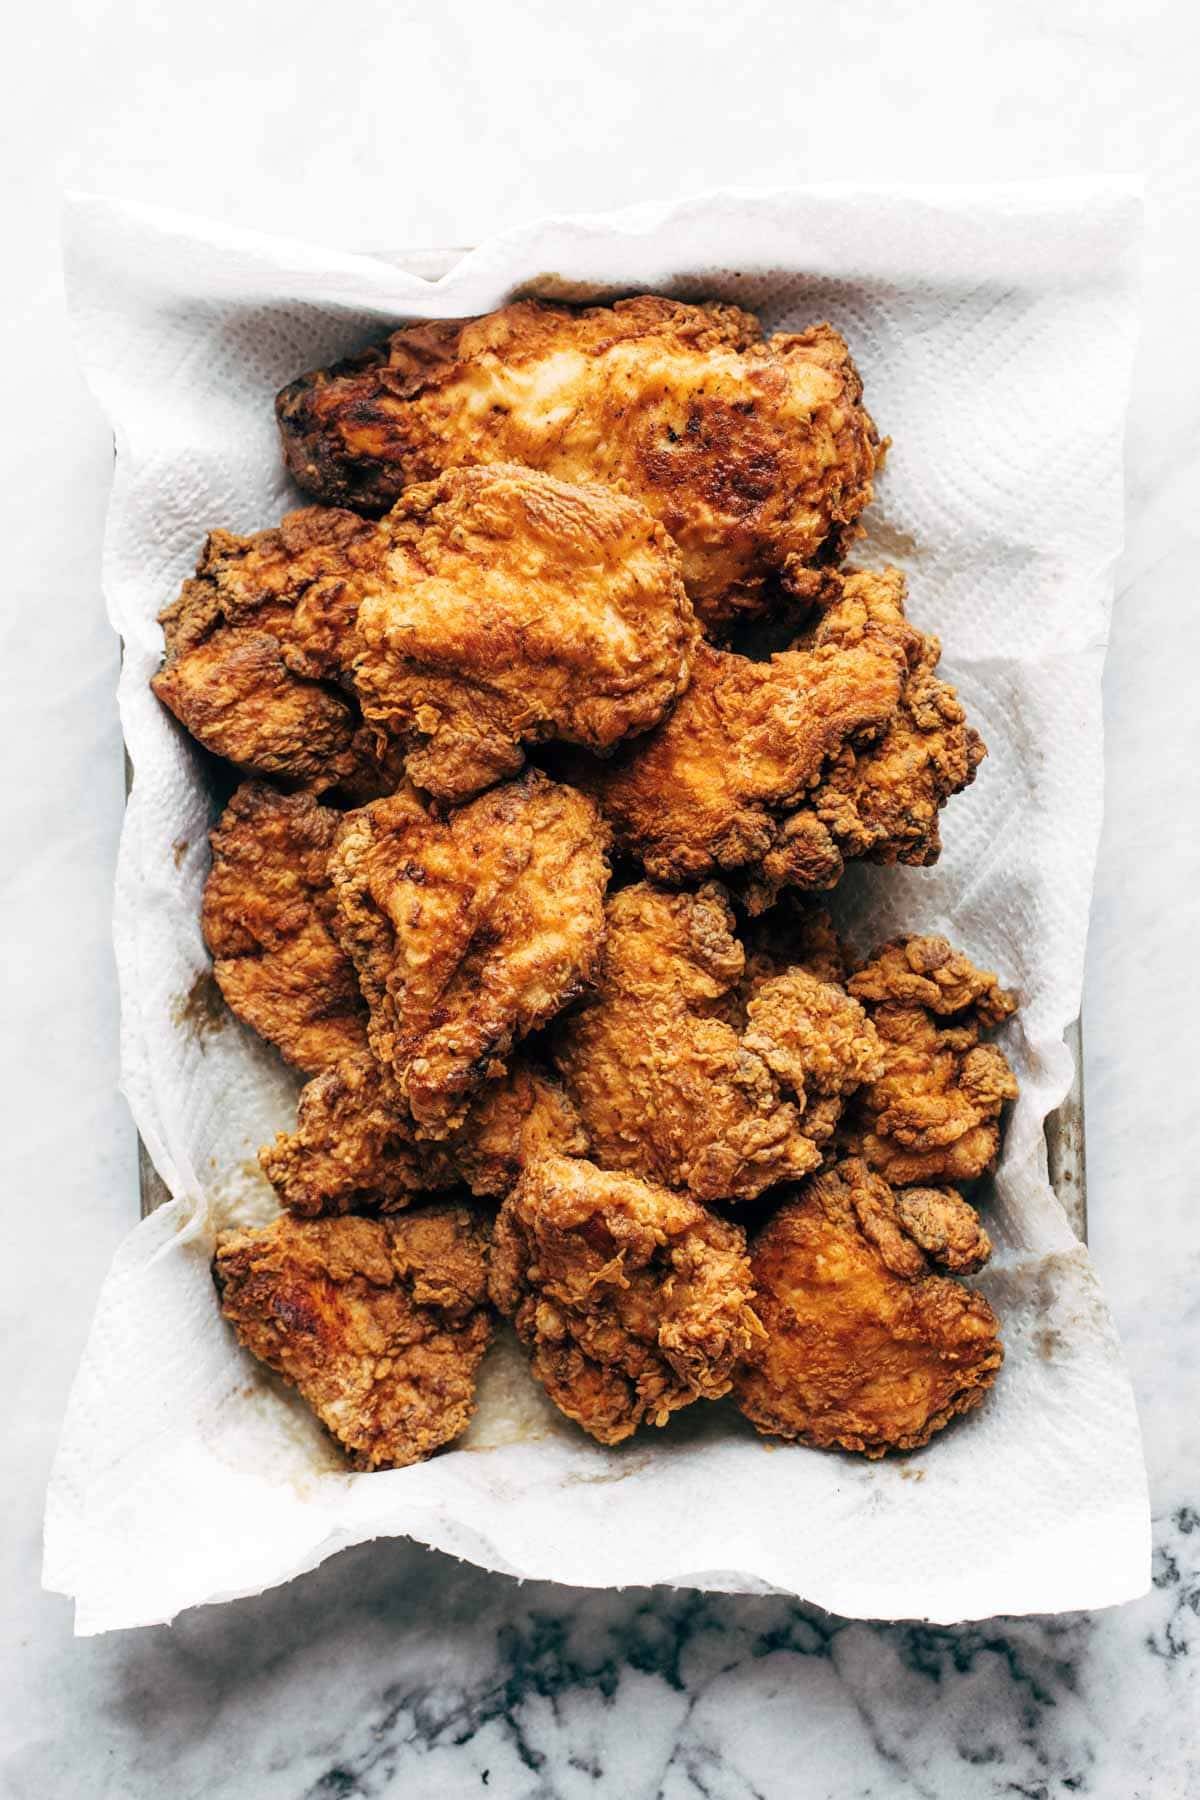 Fried chicken on a paper towel.